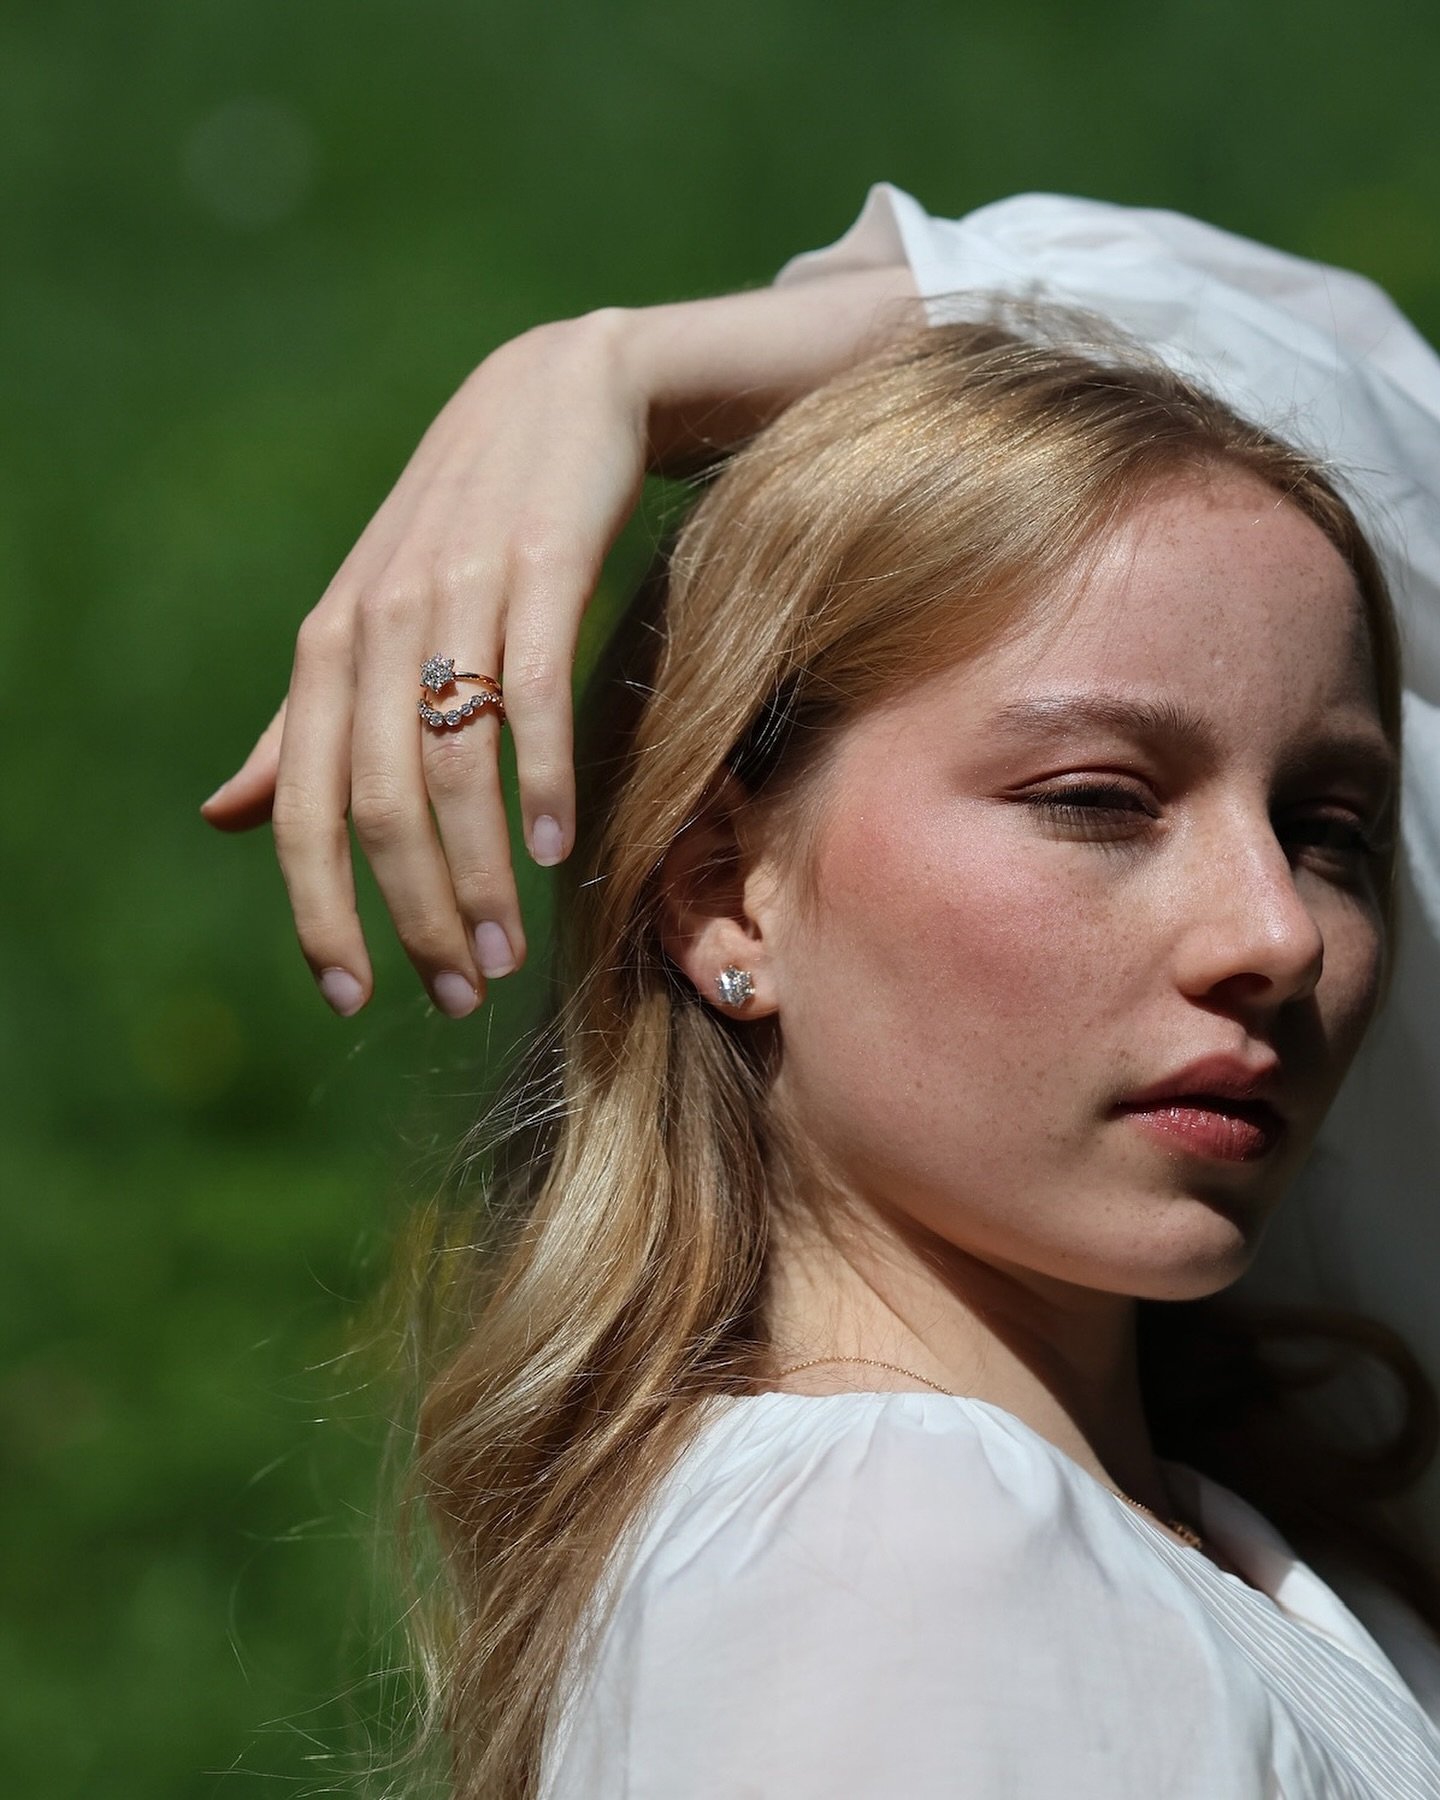 Wrapped in the beauty of outdoors, with a touch of sparkle to match.

#swisshandmadejewellery#rosegold#diamondrings#springvibes#koenig#softgirl